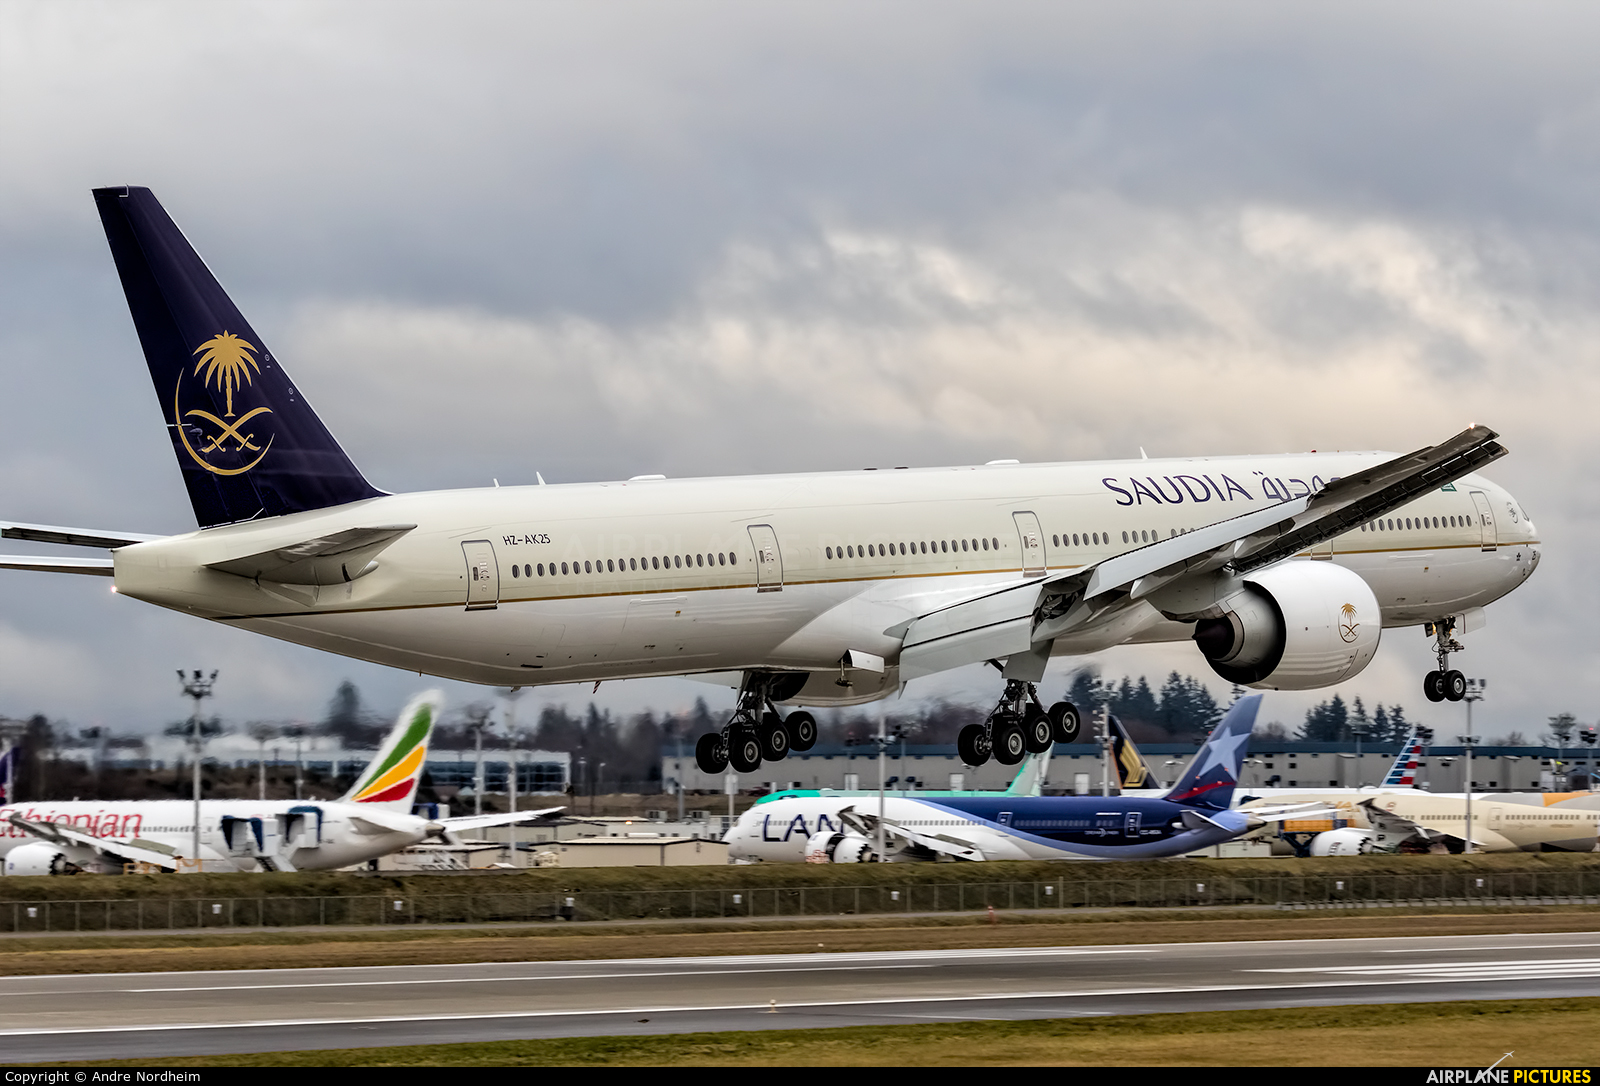 Saudi Arabian Airlines HZ-AK25 aircraft at Everett - Snohomish County / Paine Field